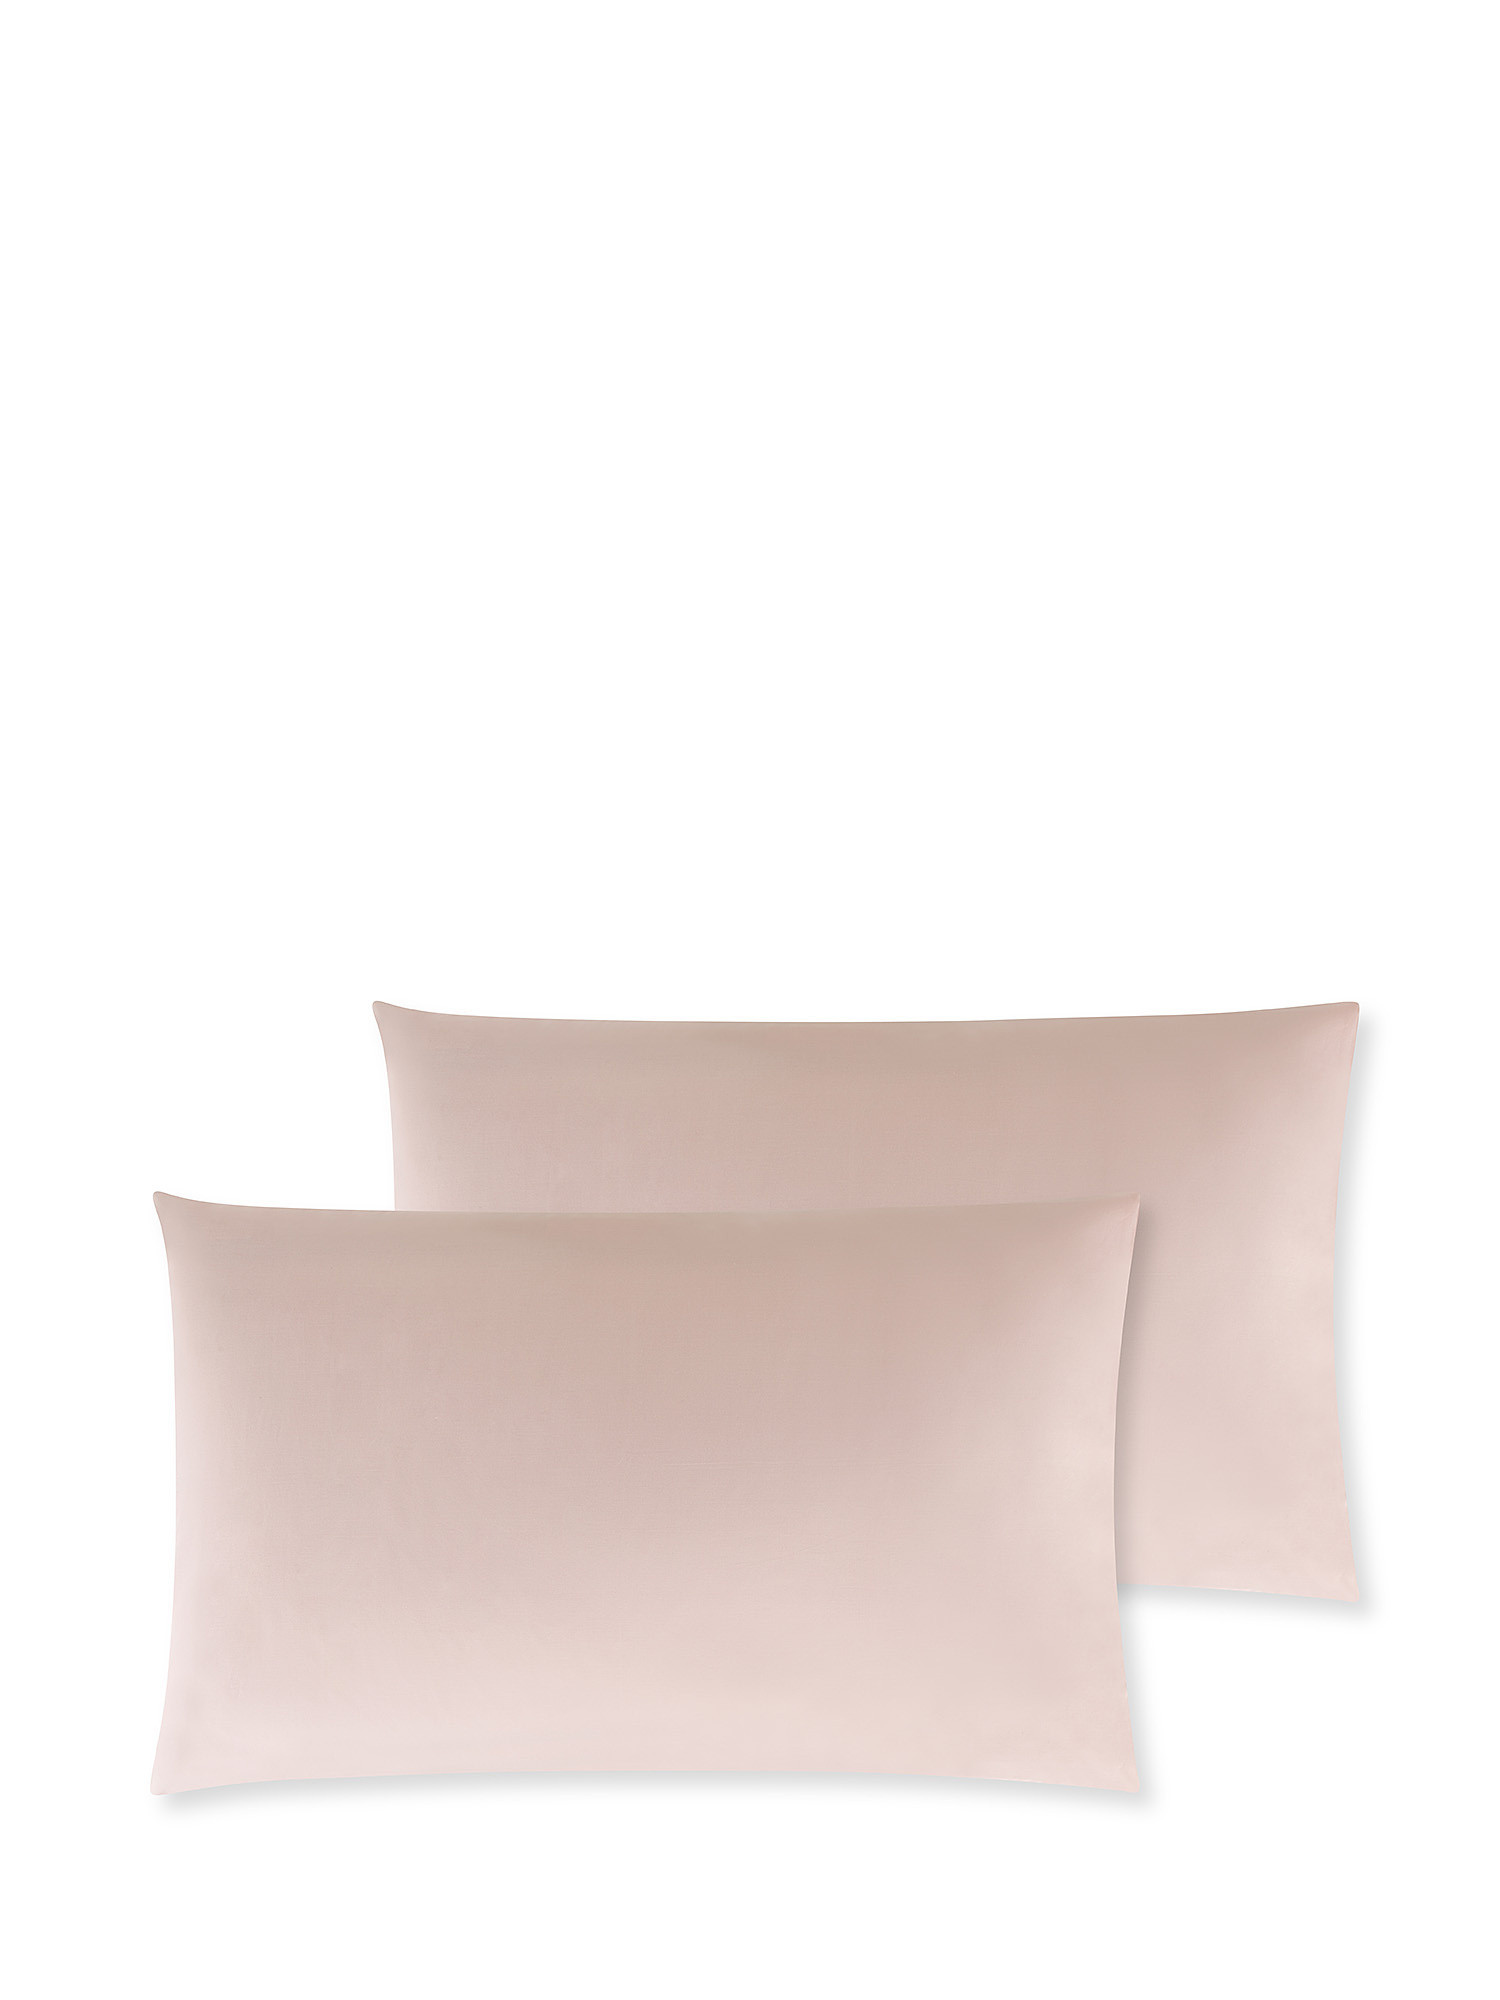 Set of 2 solid color percale cotton pillowcases., Pink, large image number 0